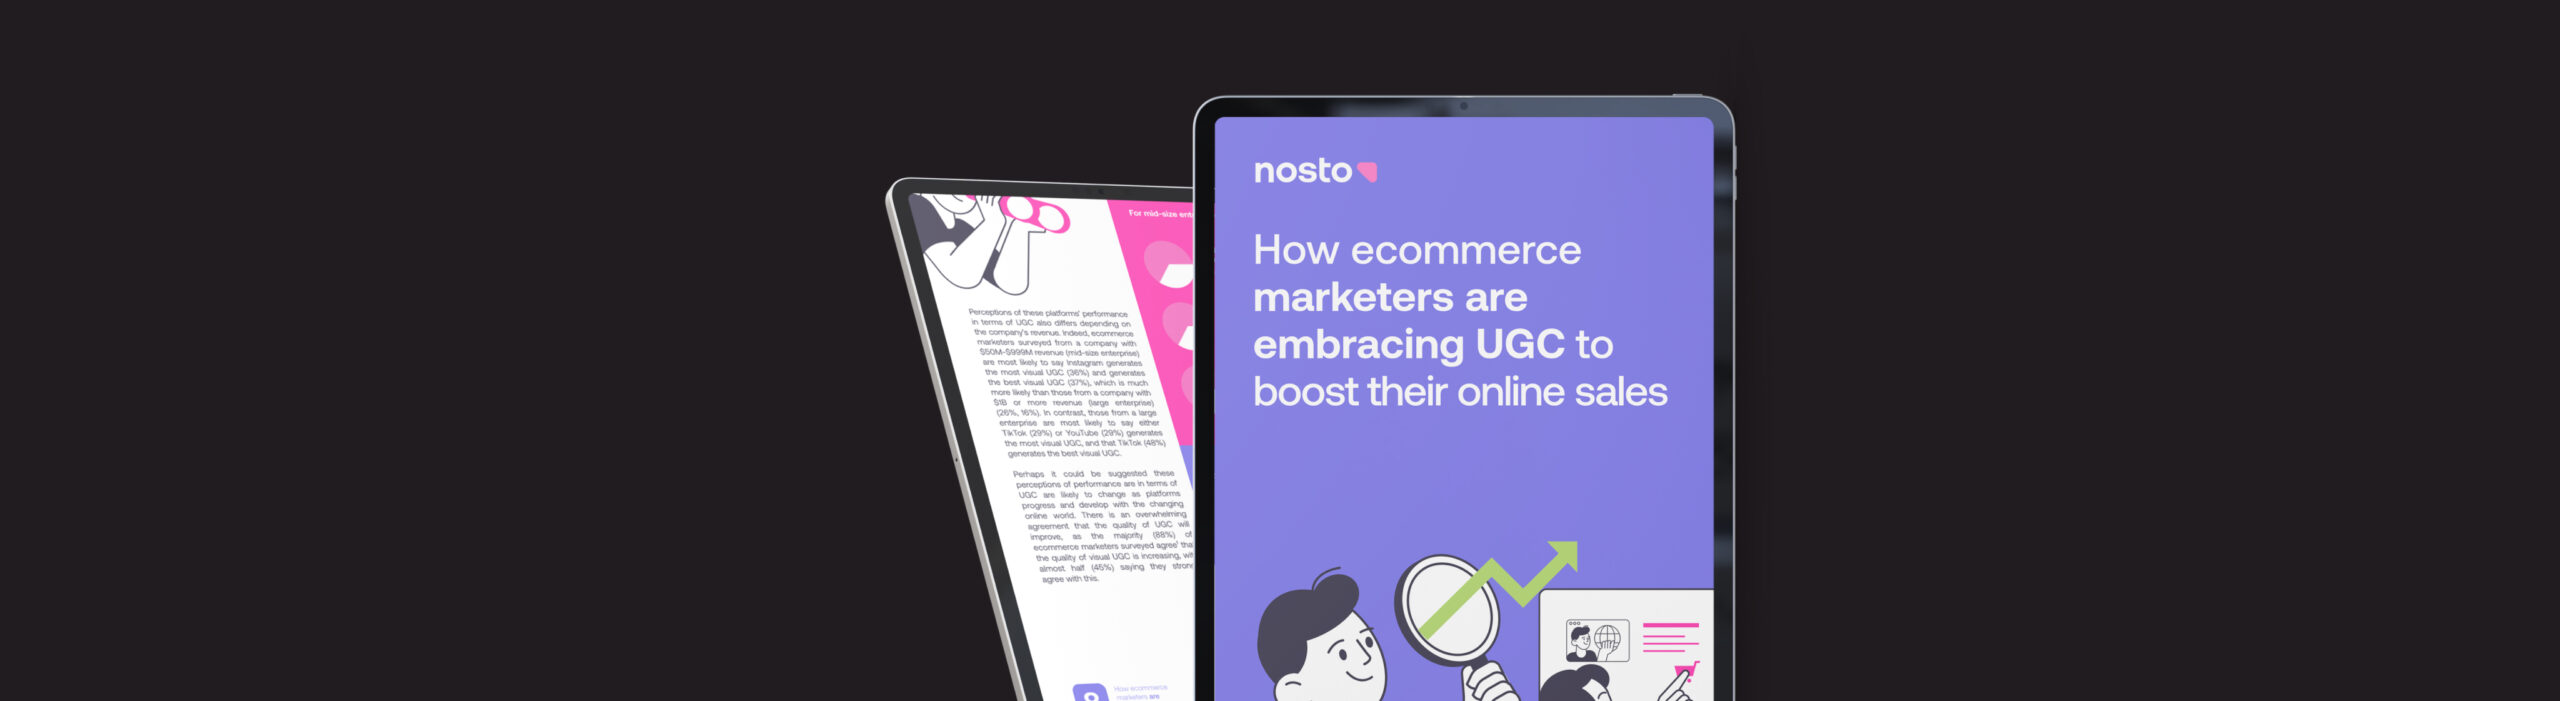 How ecommerce marketers are embracing UGC to boost their online sales